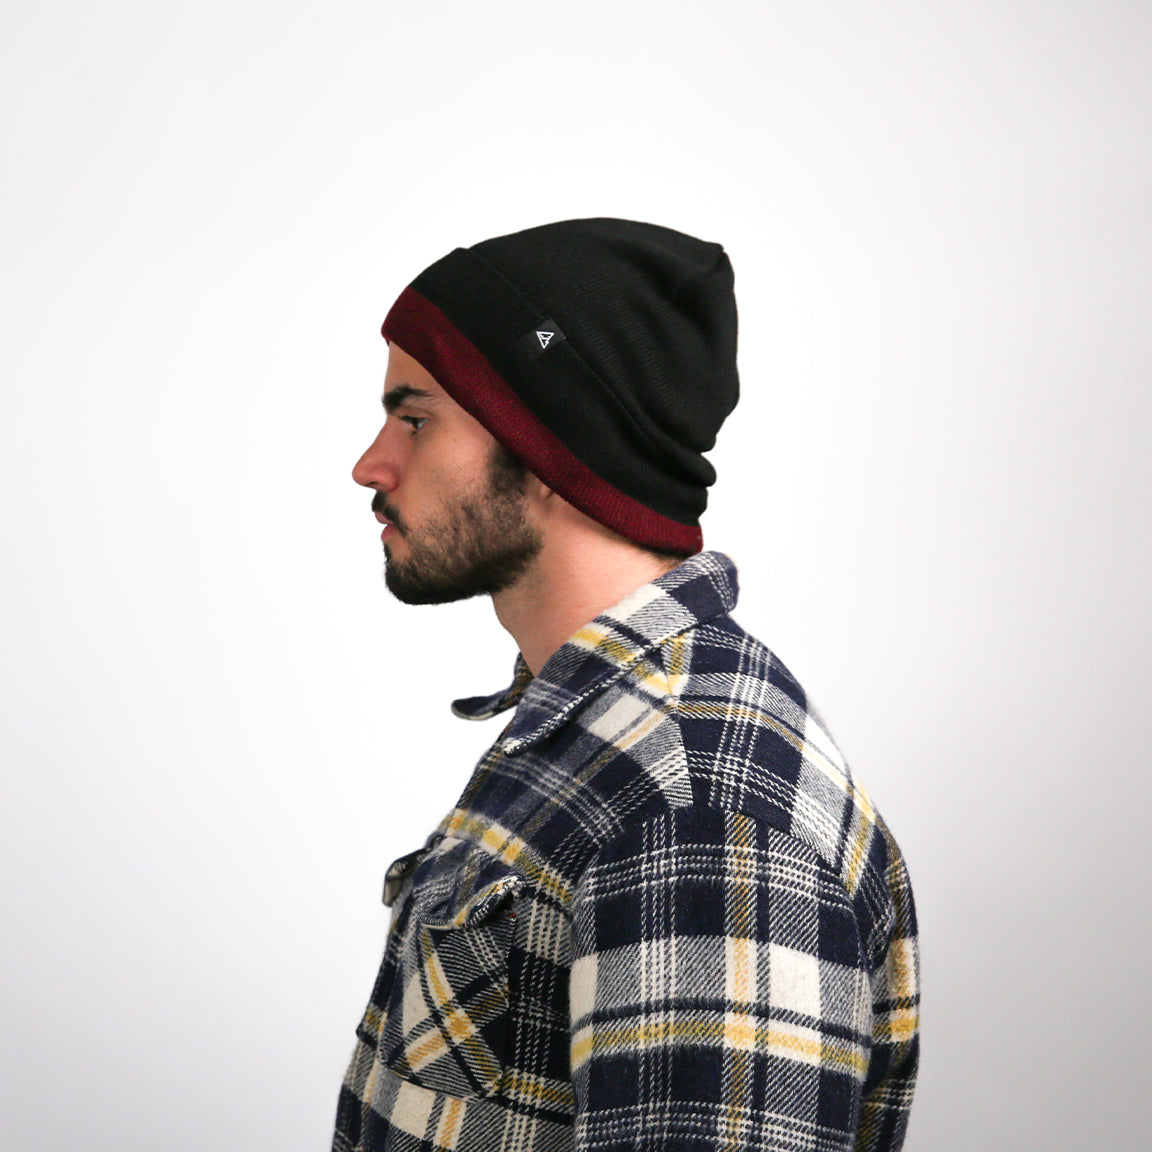 A side profile shows the man turned to his right, presenting the shape of his beanie, which has a small triangular logo on the fold. His facial features are sharp, and his expression is neutral. The plaid shirt's collar is neatly turned down, and the fabric appears soft and thick, suitable for cool weather.